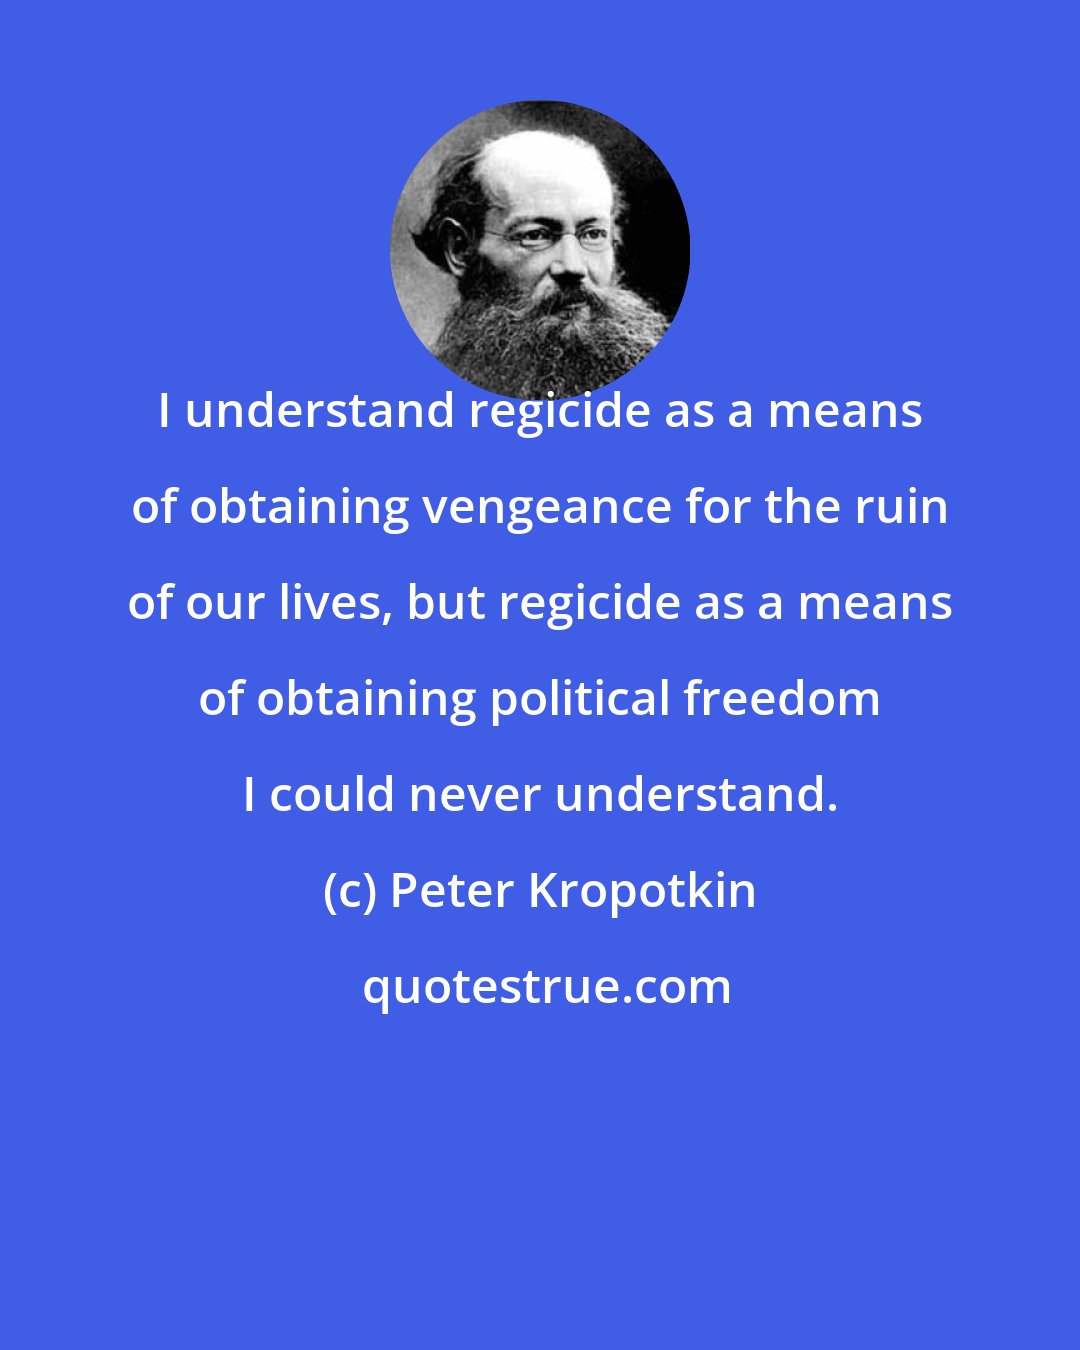 Peter Kropotkin: I understand regicide as a means of obtaining vengeance for the ruin of our lives, but regicide as a means of obtaining political freedom I could never understand.